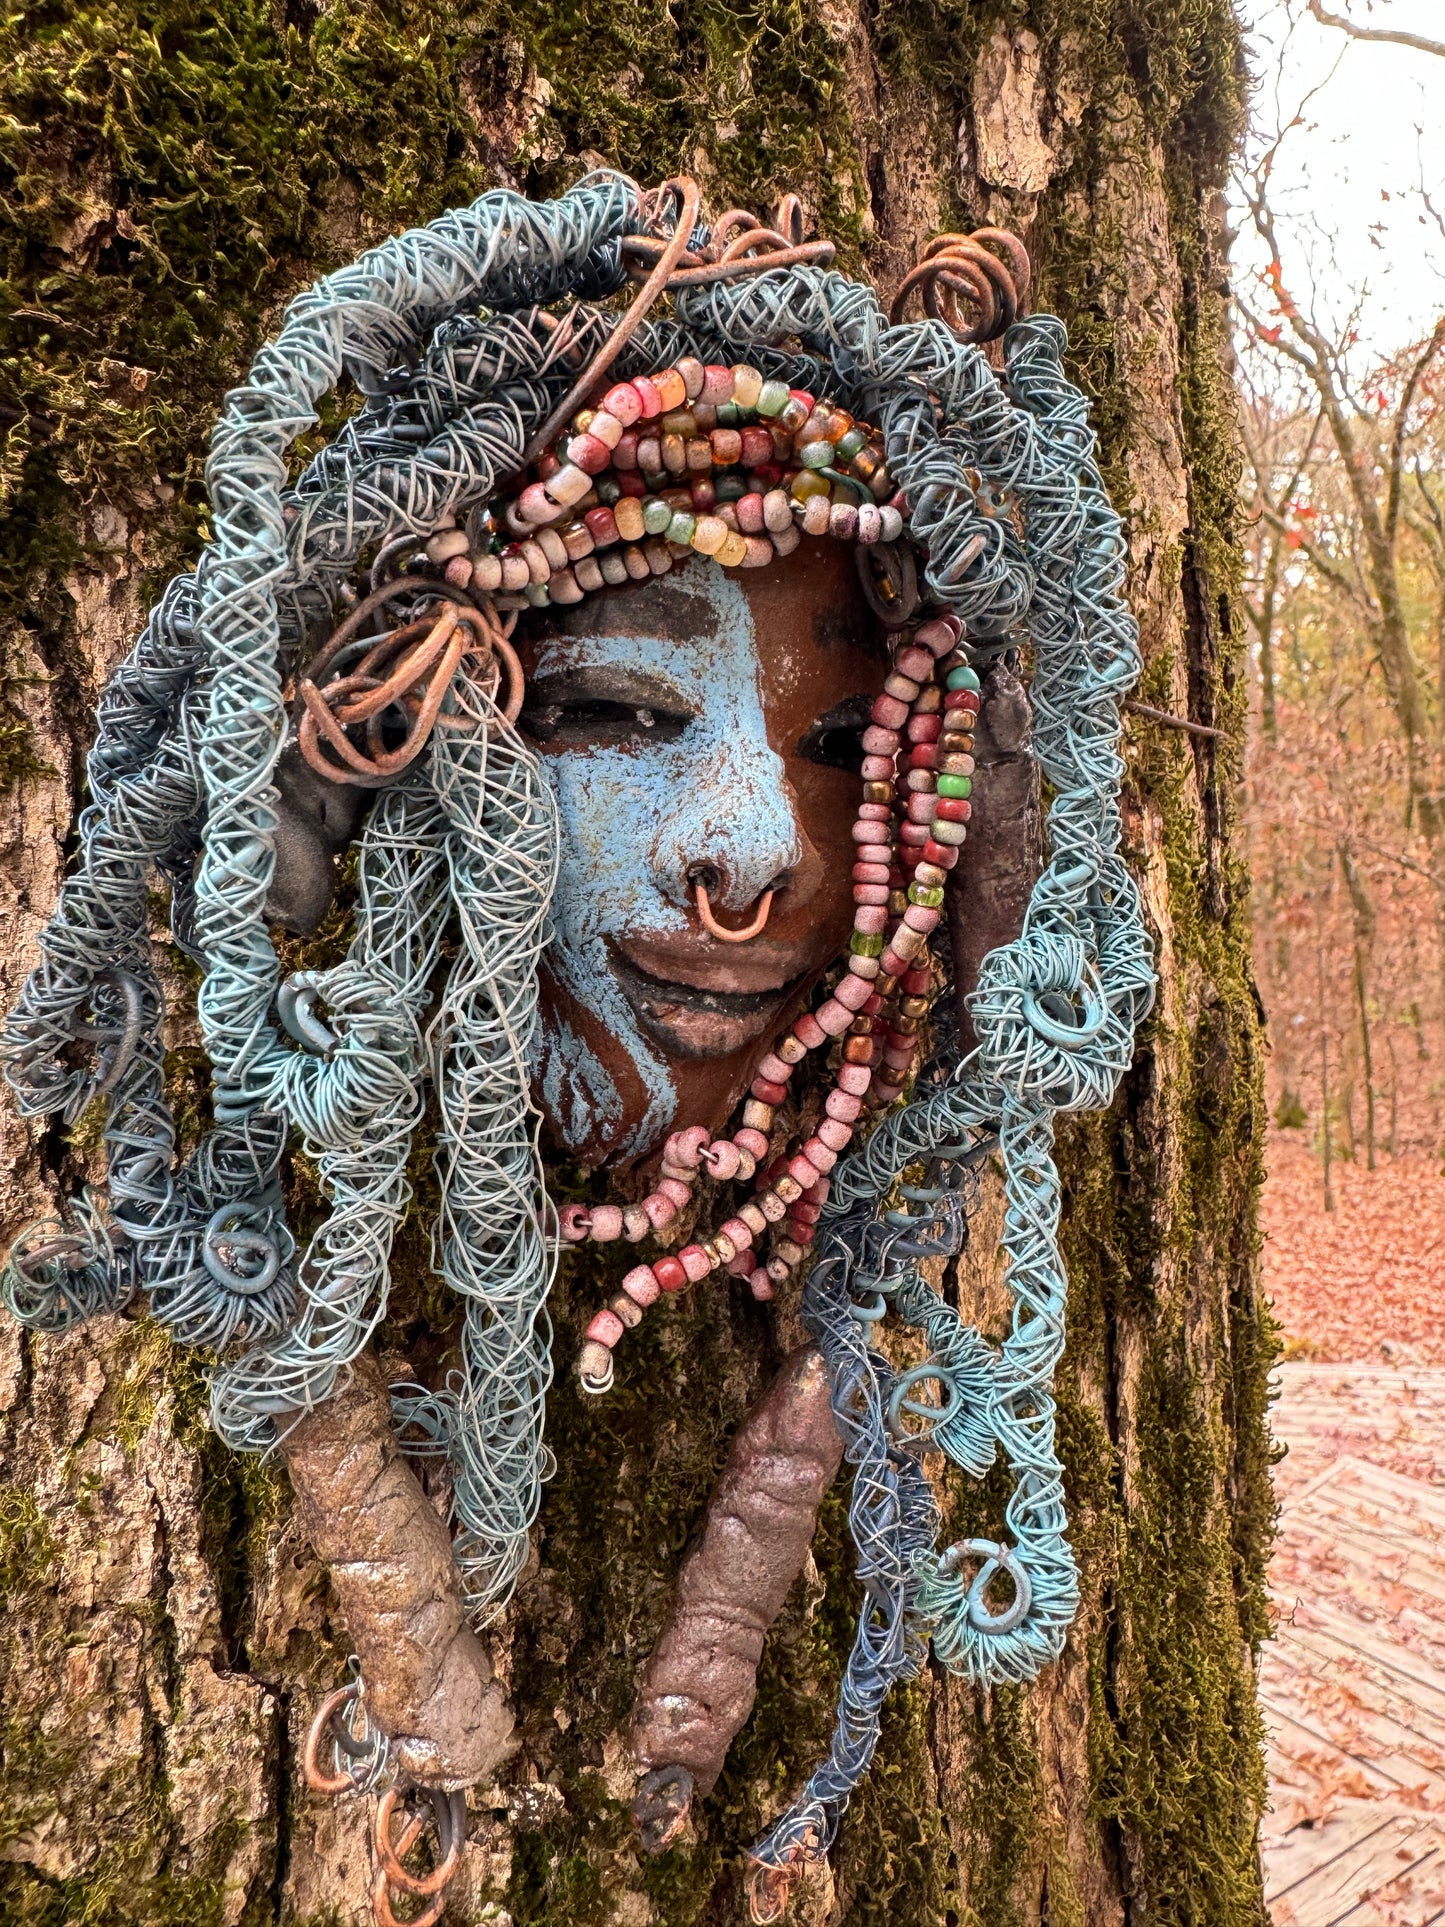 Zola is a mesmerizing raku mask with a captivating tribal face. She measures approximately 5 x 9" and weighs 7 oz. The mask is further decorated with blue hair and a copper nose ring.